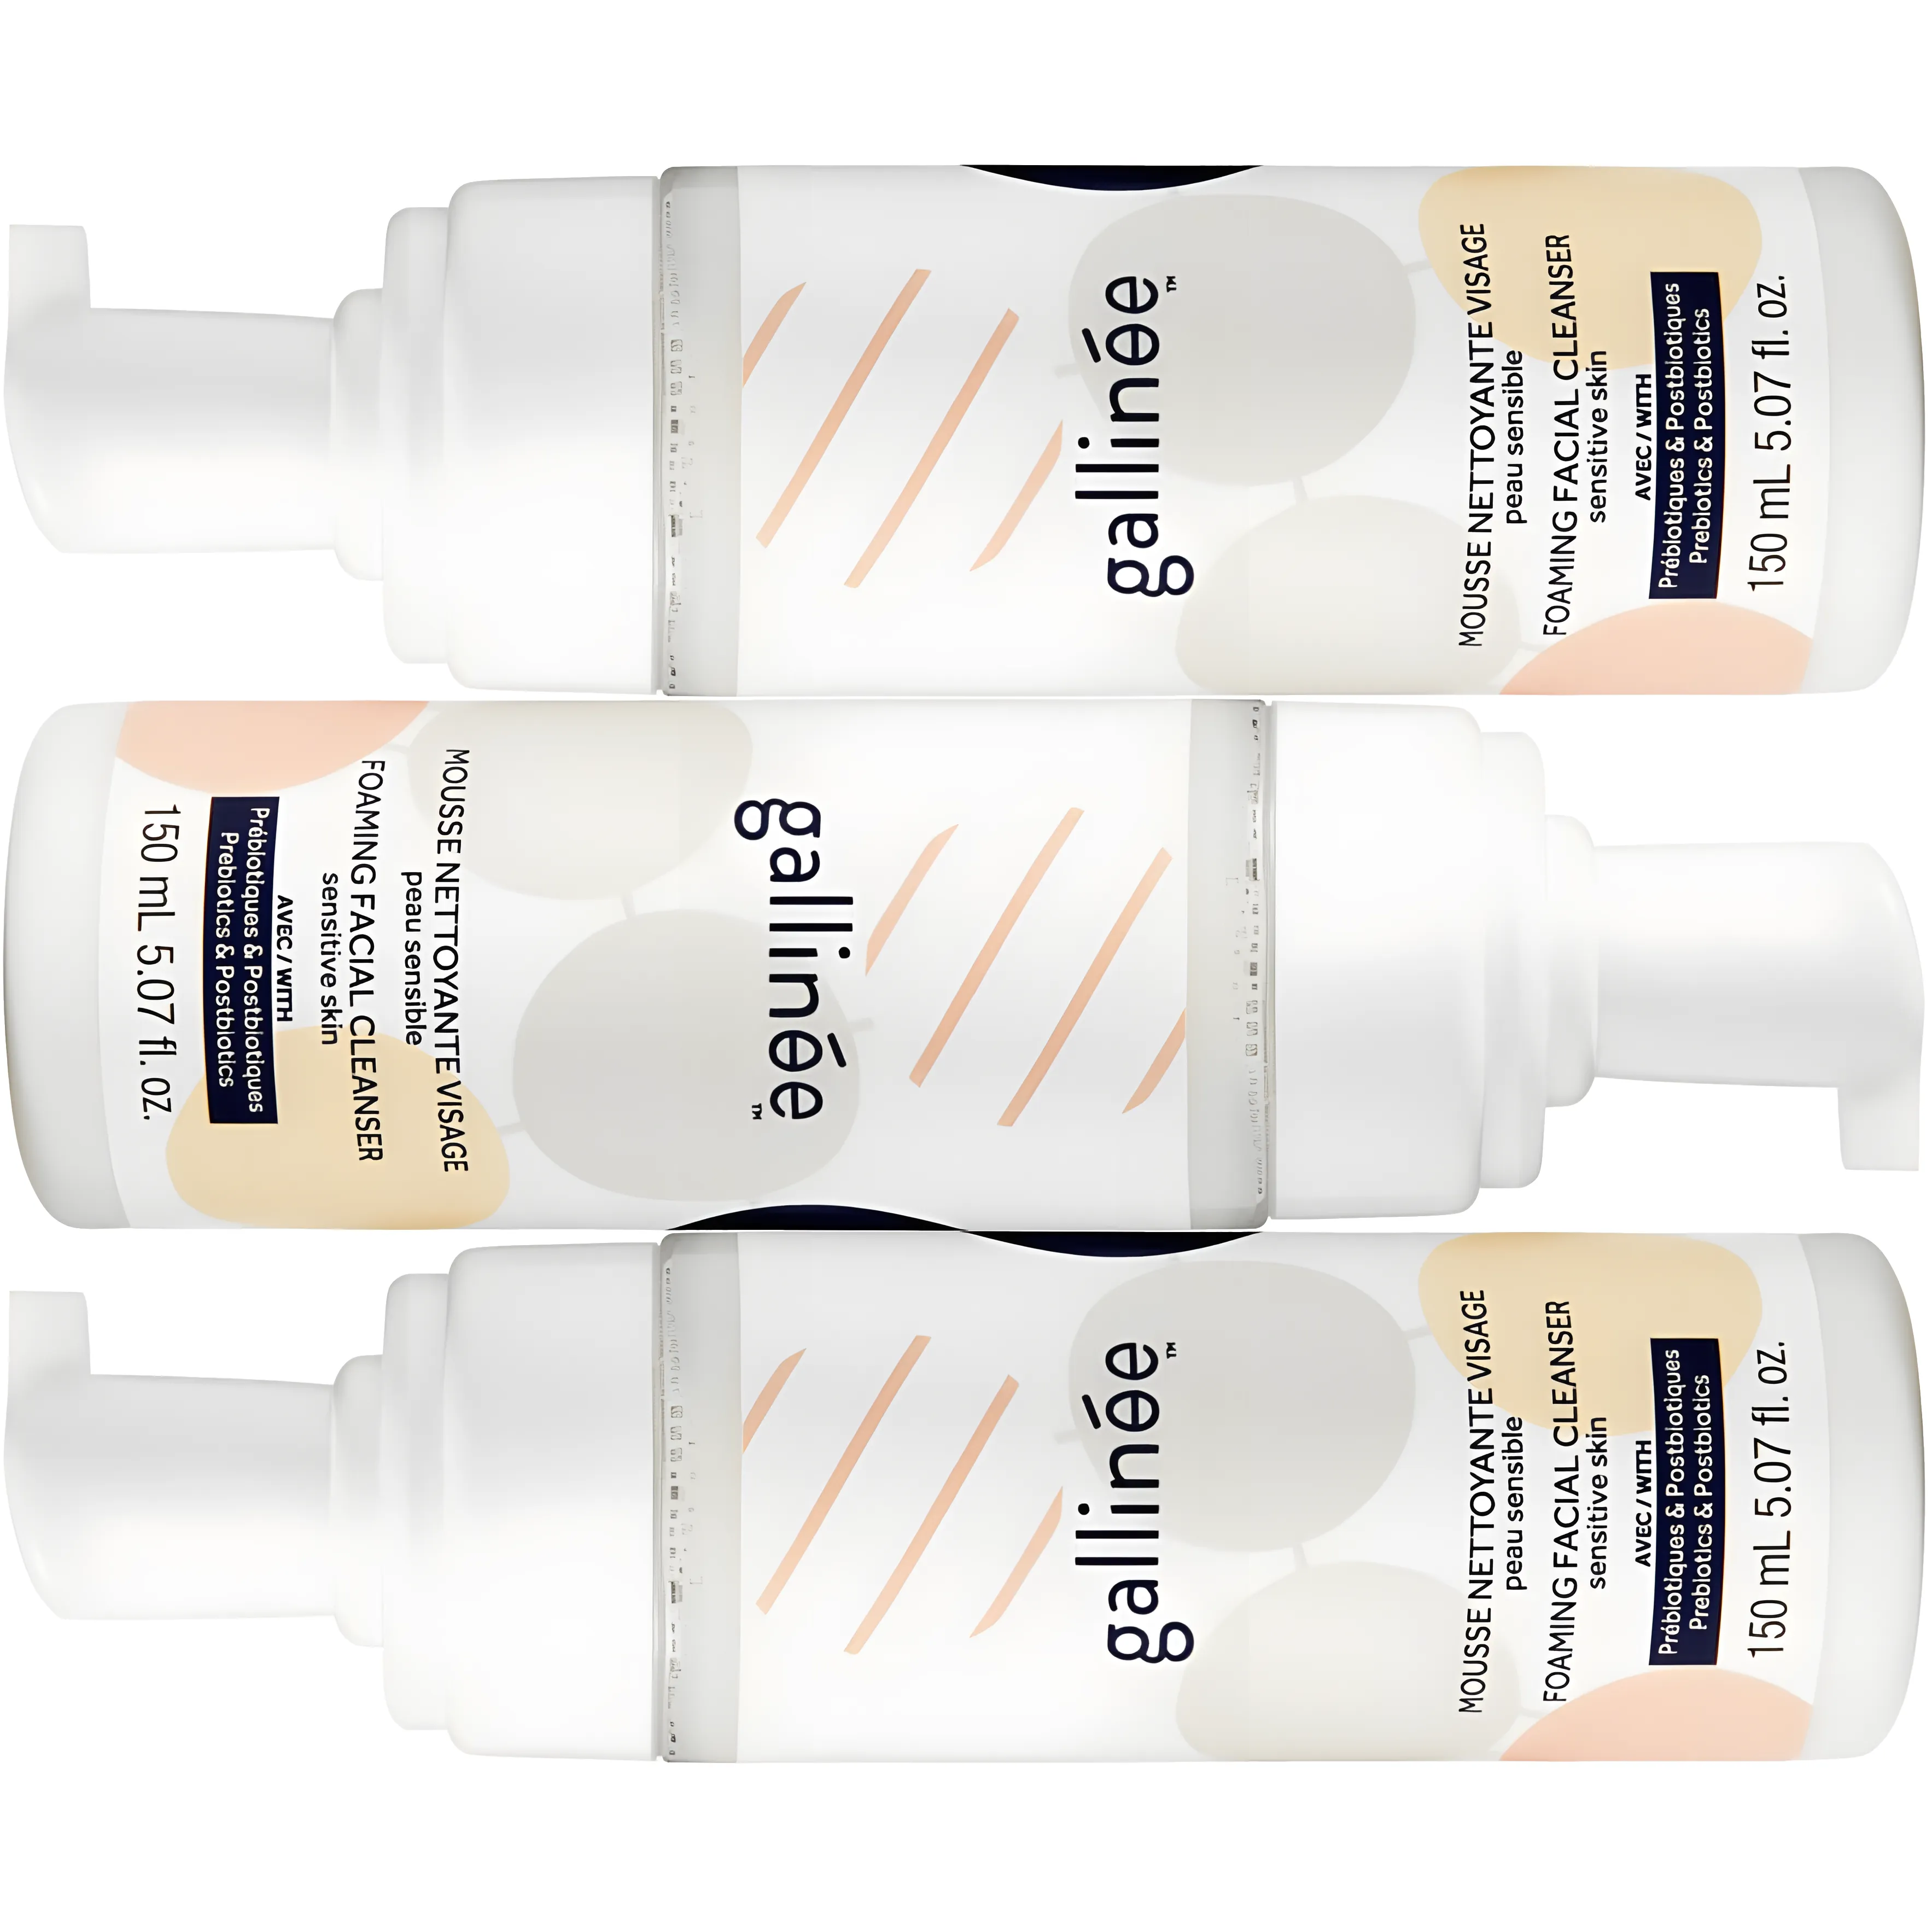 Free Gallinée Skincare Samples For The Members Of Their Skin Rescue Camp